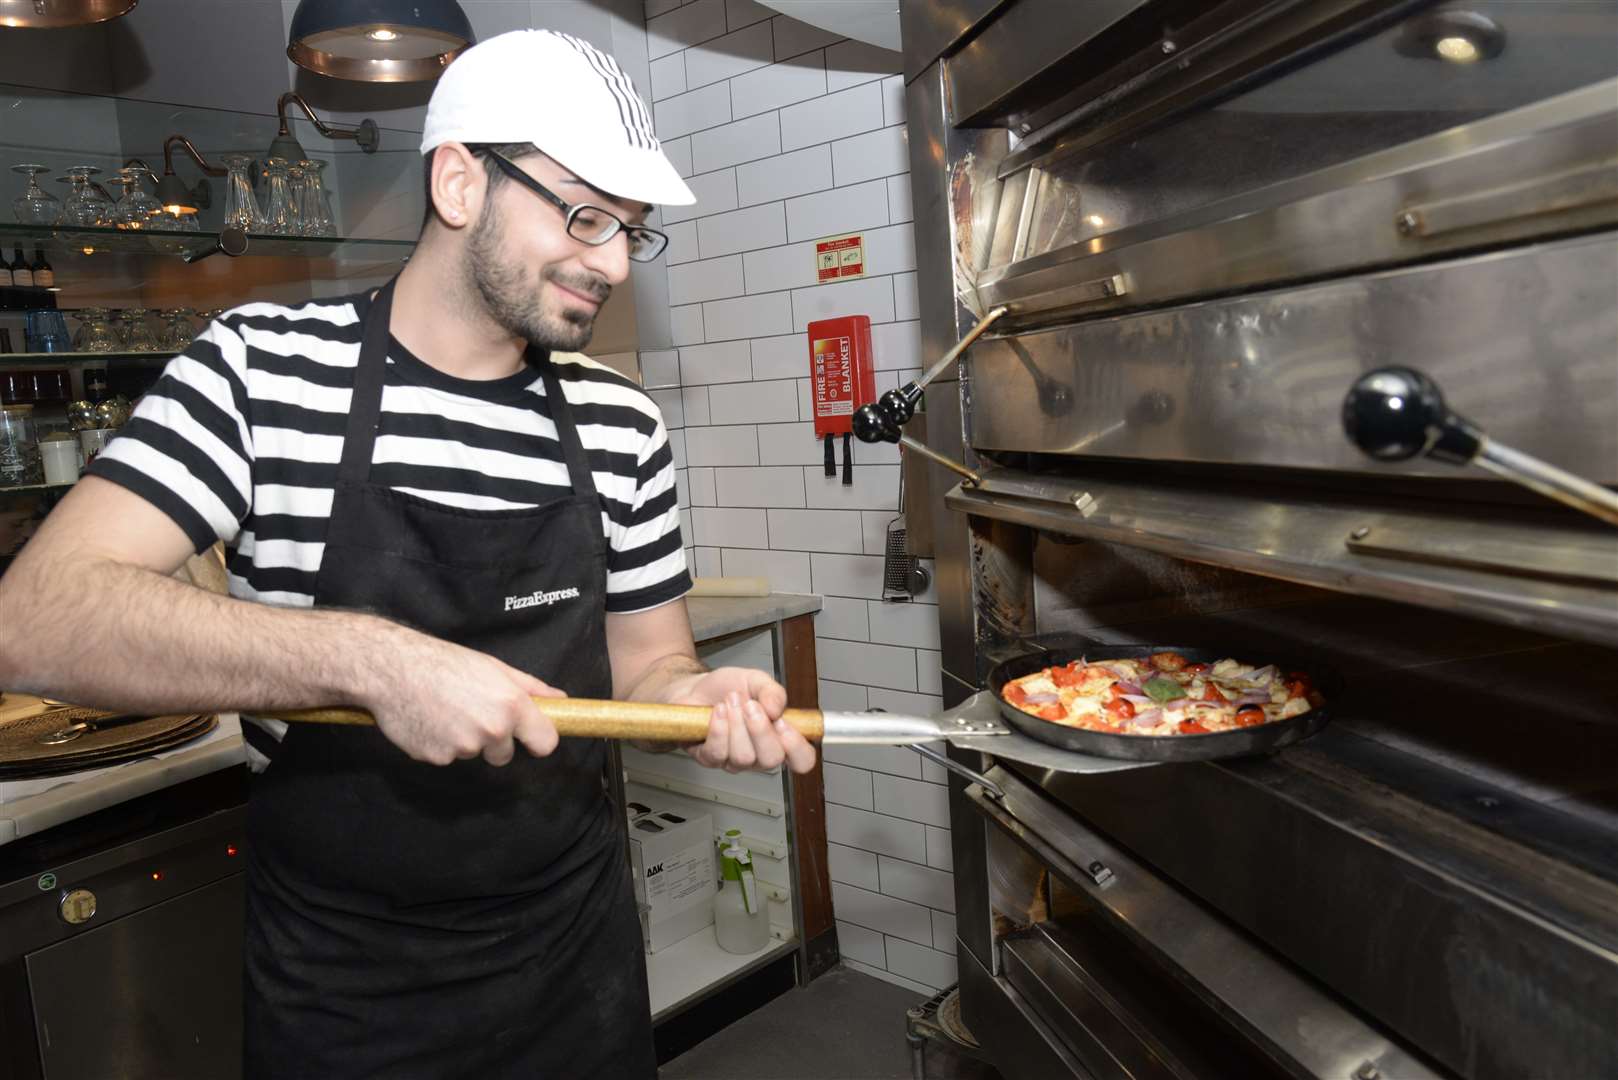 Pizza Express has outlets across Kent - including this one in Ramsgate